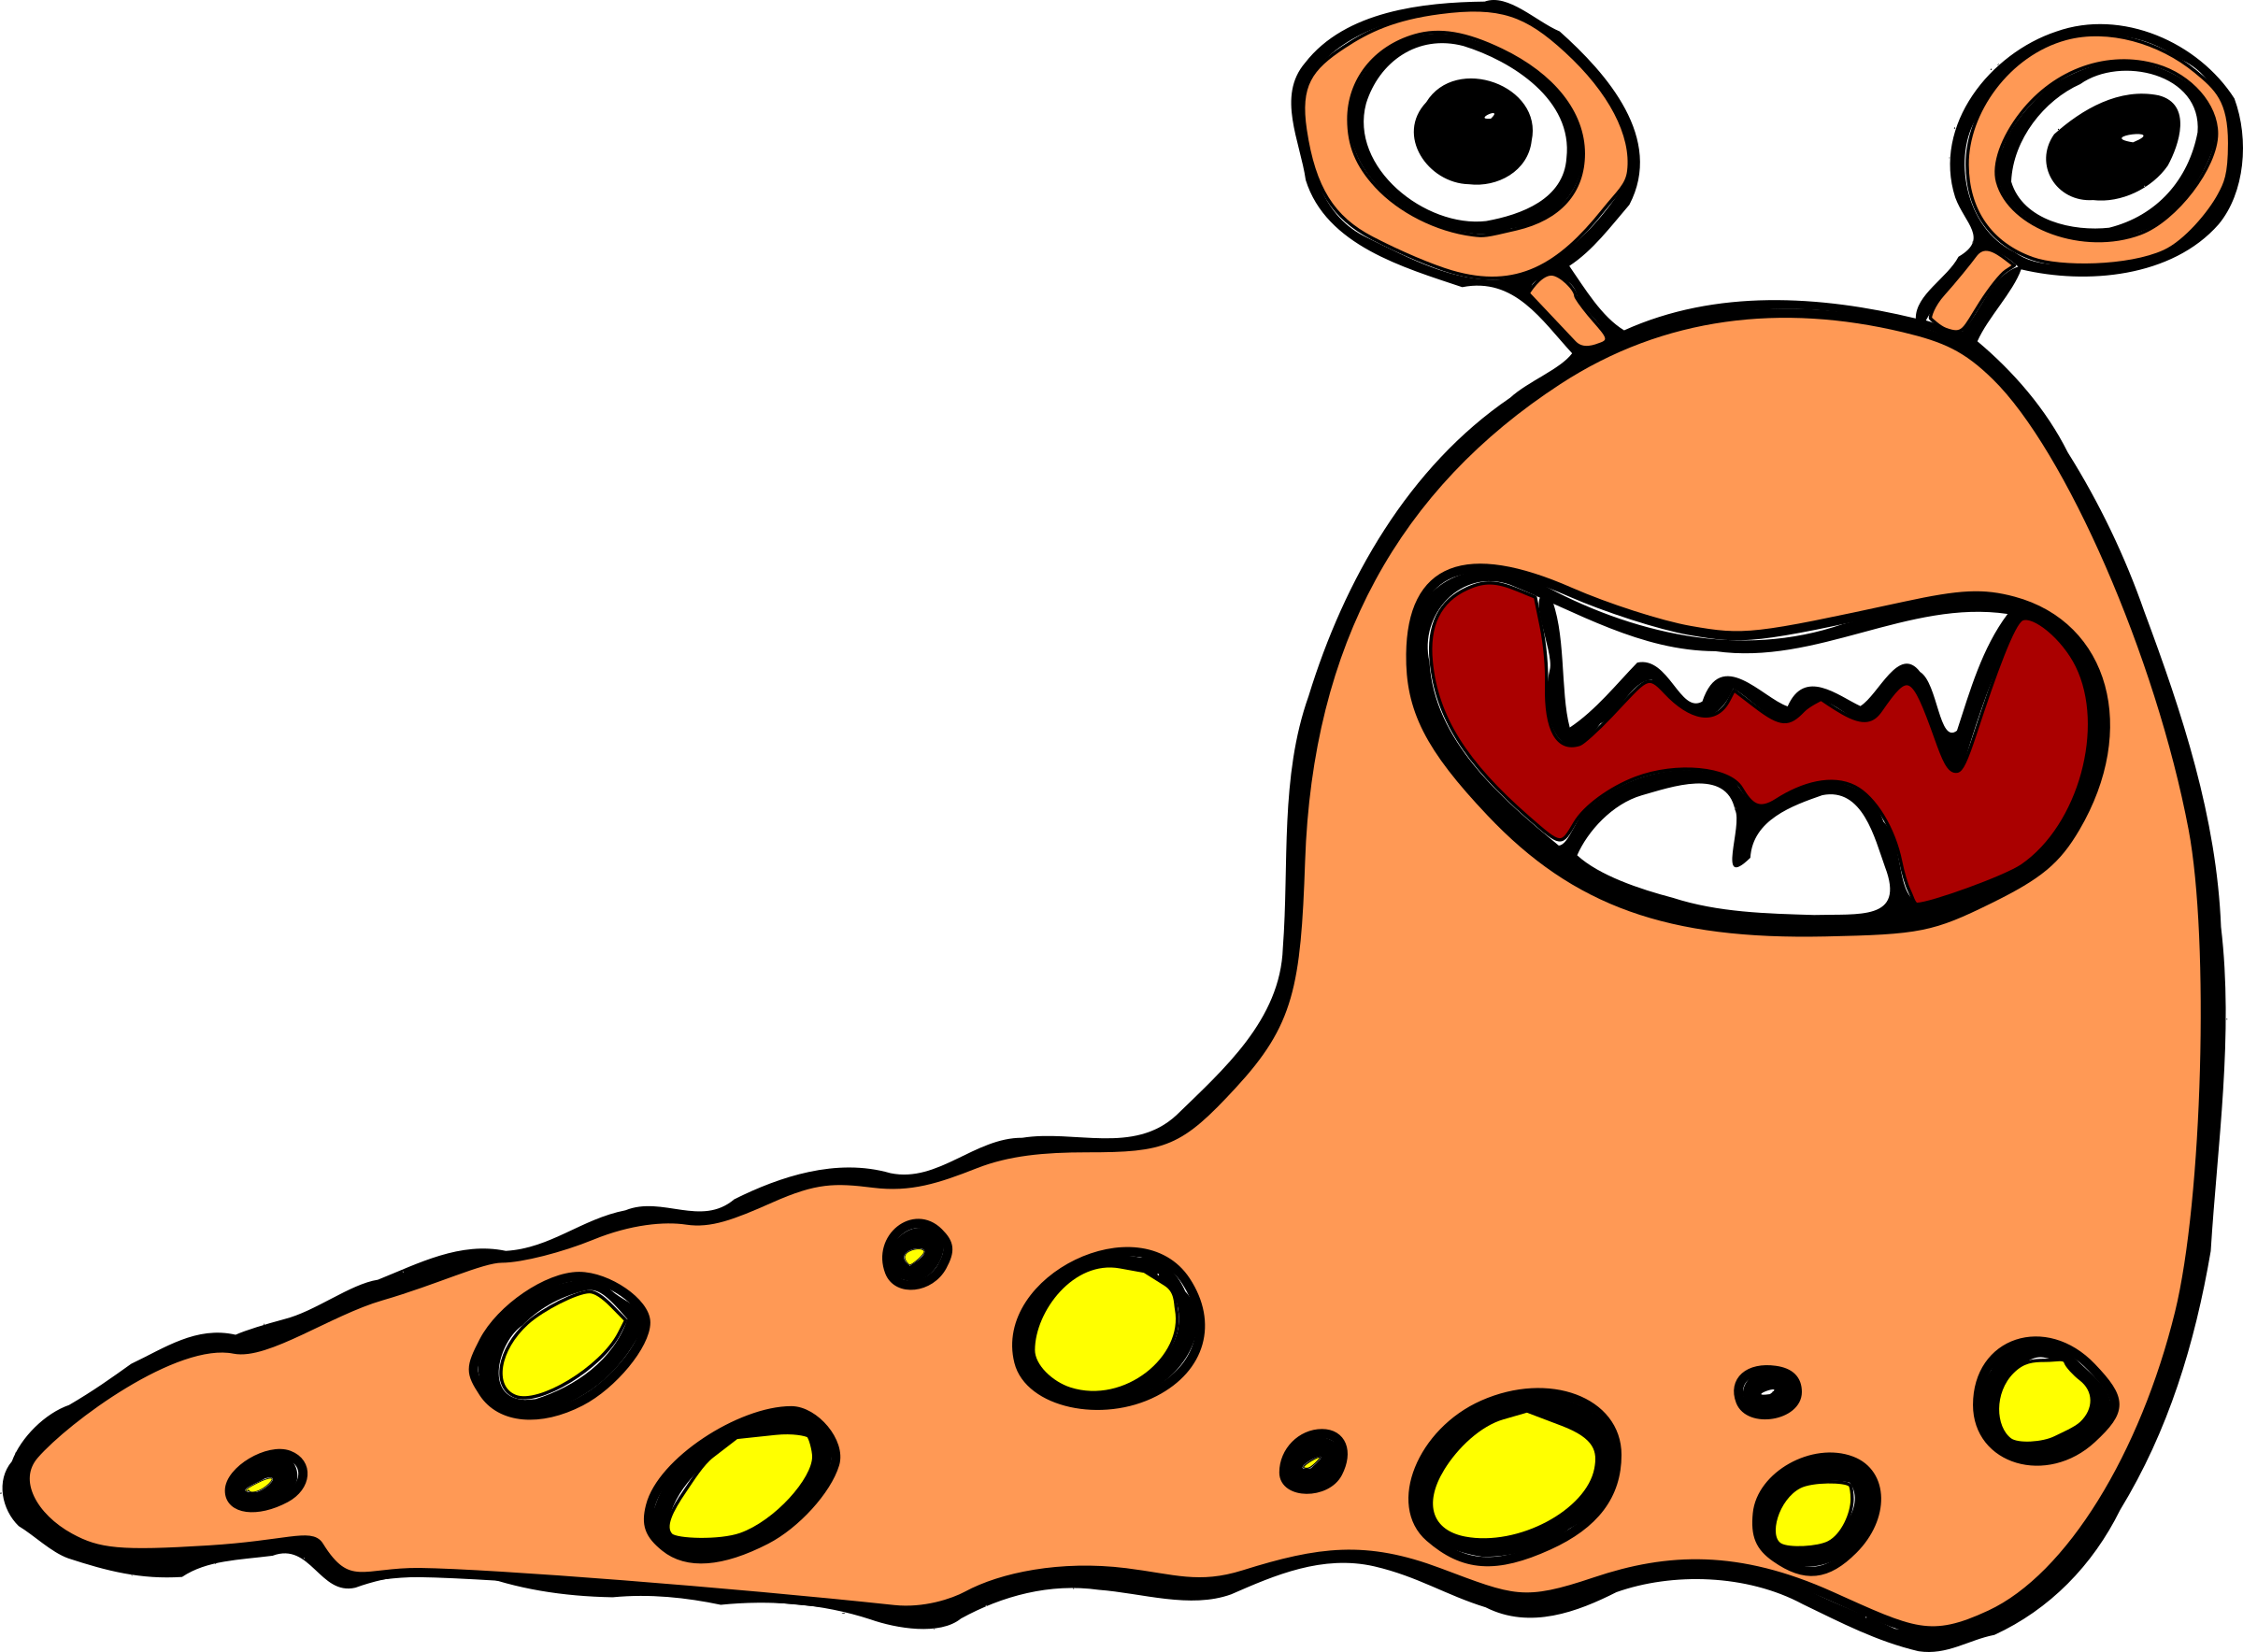 clipart science monster